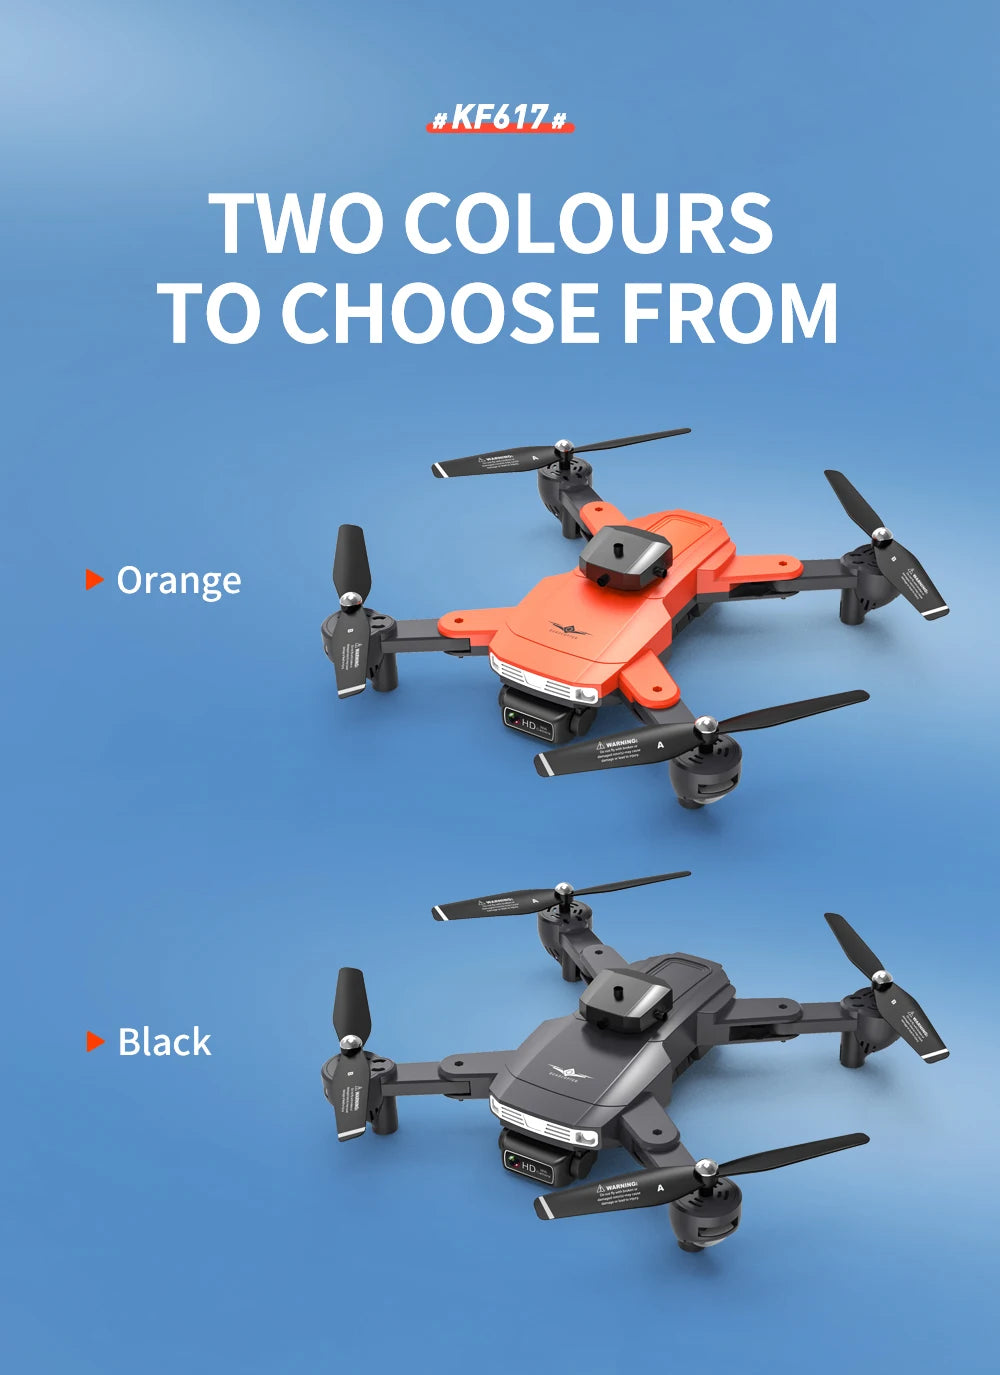 #kf617 # two colours to choose from orange